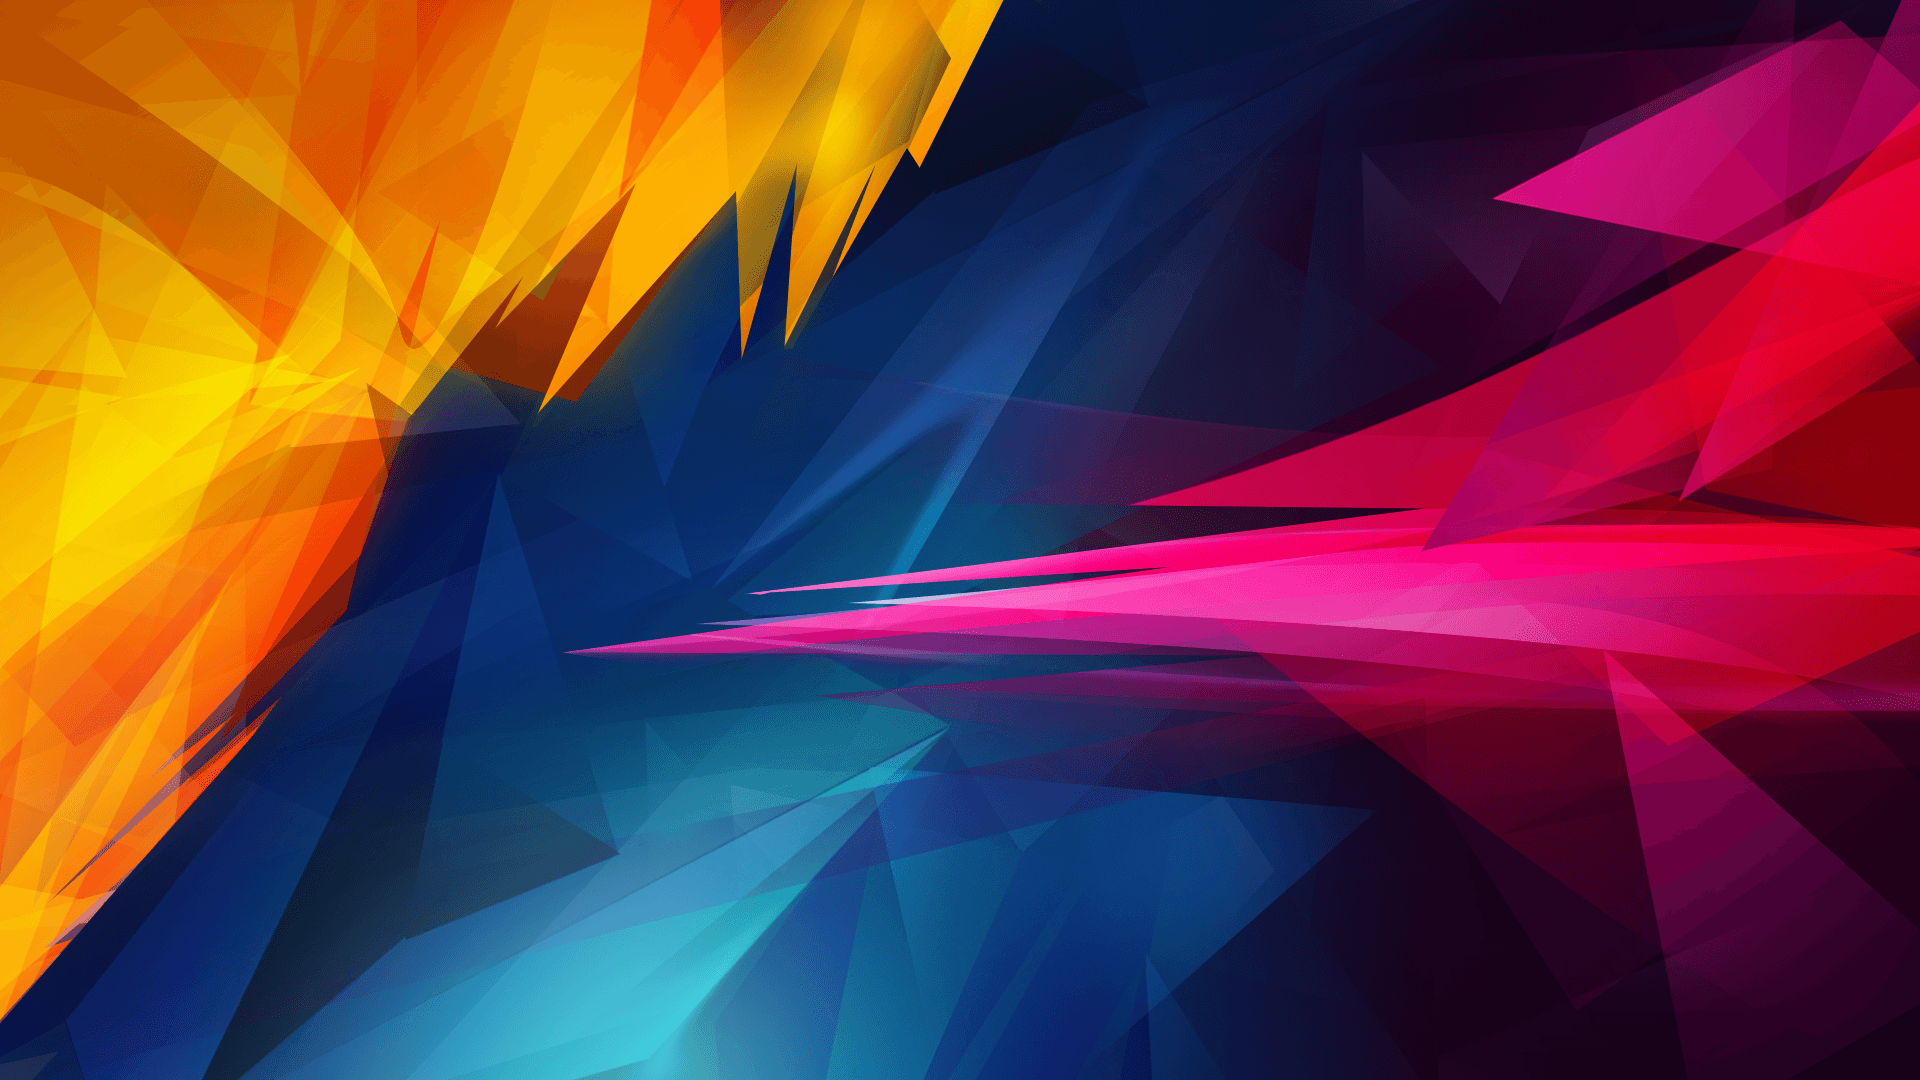 Abstract Background Images  Free Download on Freepik